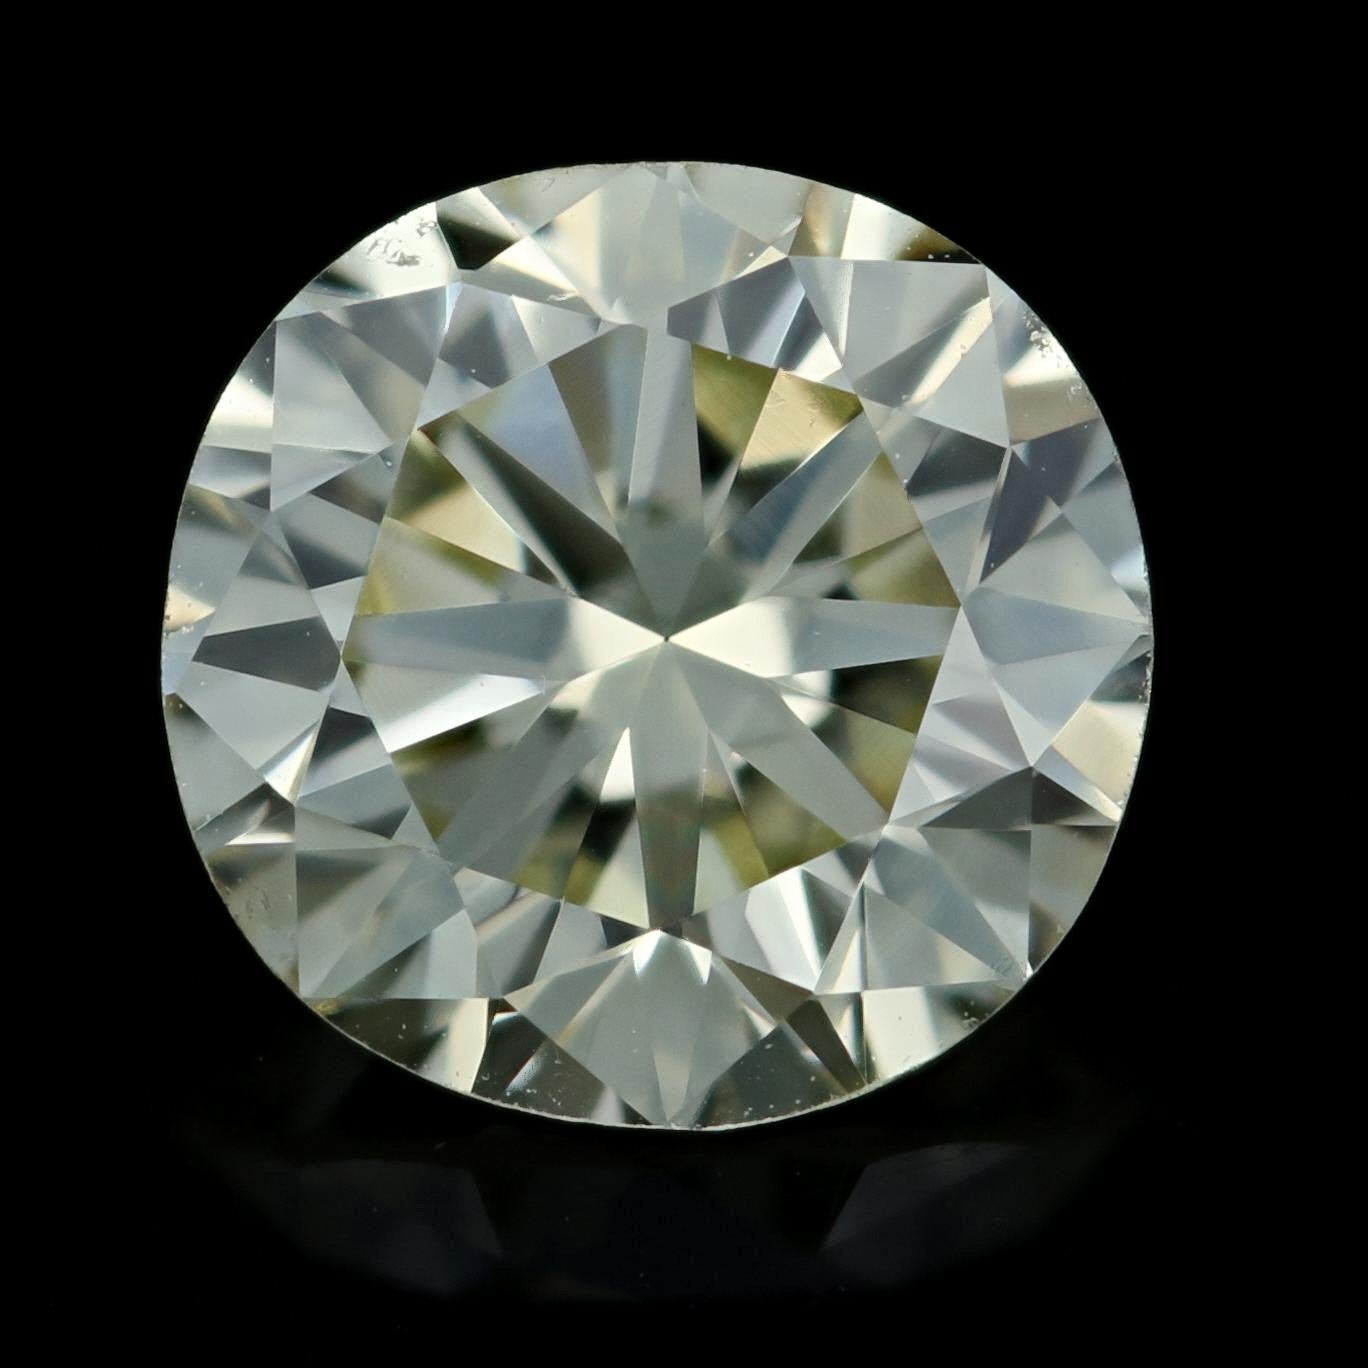 Weight: 1.26ct
Cut: Round Brilliant 
Color: W - X   
Clarity: VVS2 
Dimensions (mm): 6.76 - 7.01 x 4.22 

GIA Report Number: 1126601714
(laser inscribed only) 

Condition: New  

Please check out the enlarged pictures.

Thank you for taking the time